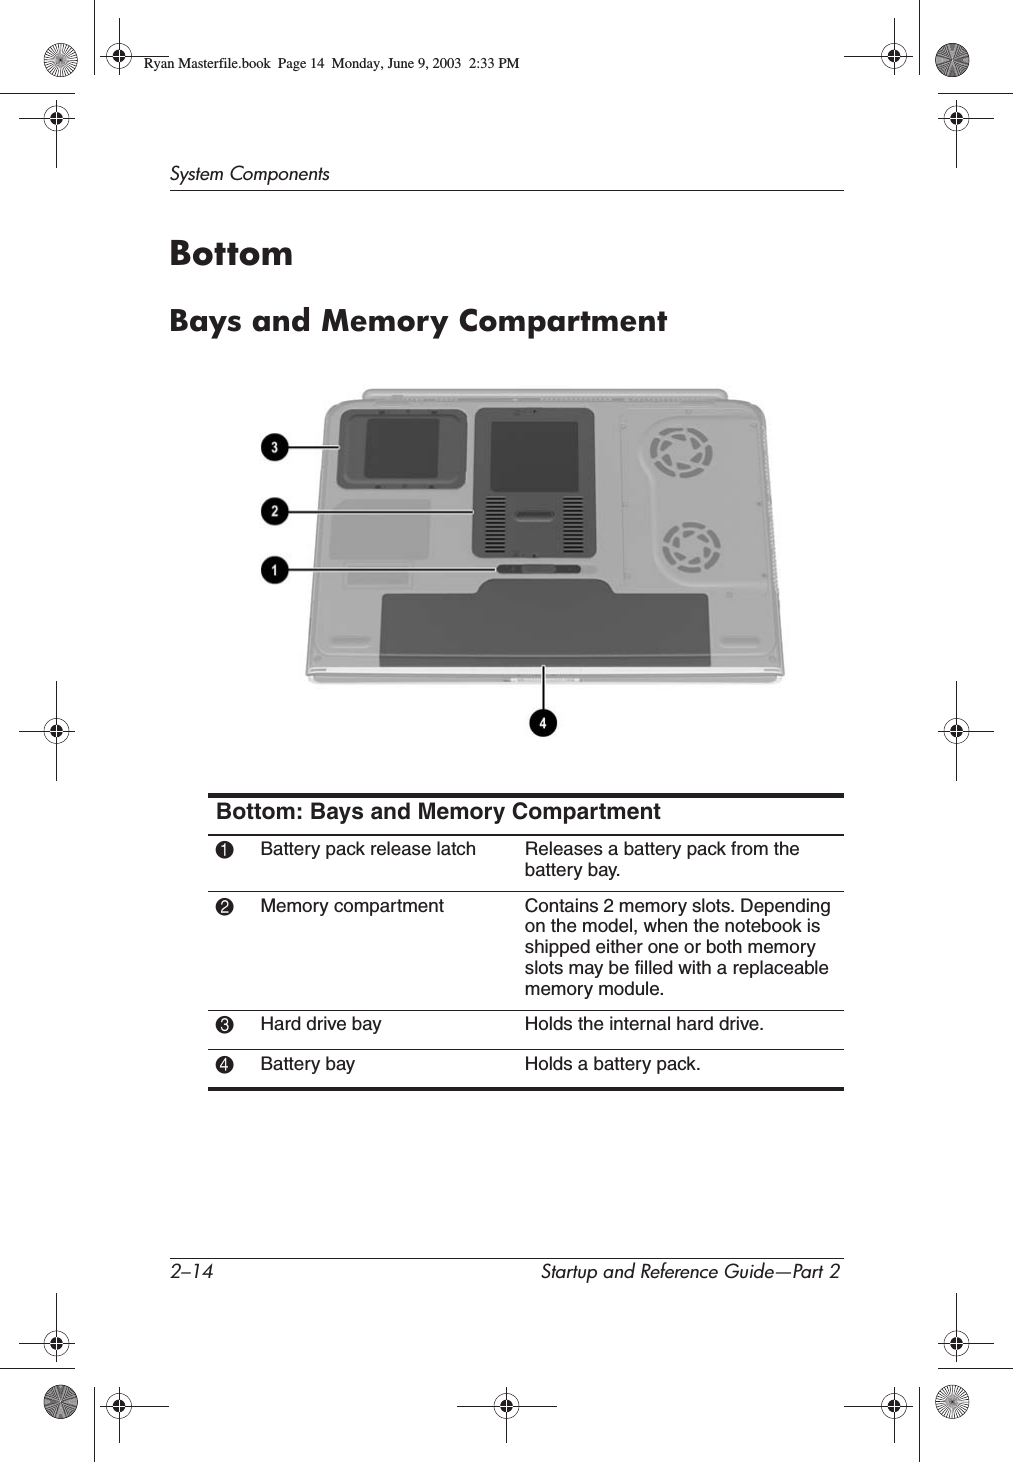 2–14 Startup and Reference Guide—Part 2System ComponentsBottomBays and Memory CompartmentBottom: Bays and Memory Compartment1Battery pack release latch Releases a battery pack from the battery bay.2Memory compartment Contains 2 memory slots. Depending on the model, when the notebook is shipped either one or both memory slots may be filled with a replaceable memory module.3Hard drive bay Holds the internal hard drive.4Battery bay Holds a battery pack.Ryan Masterfile.book  Page 14  Monday, June 9, 2003  2:33 PM